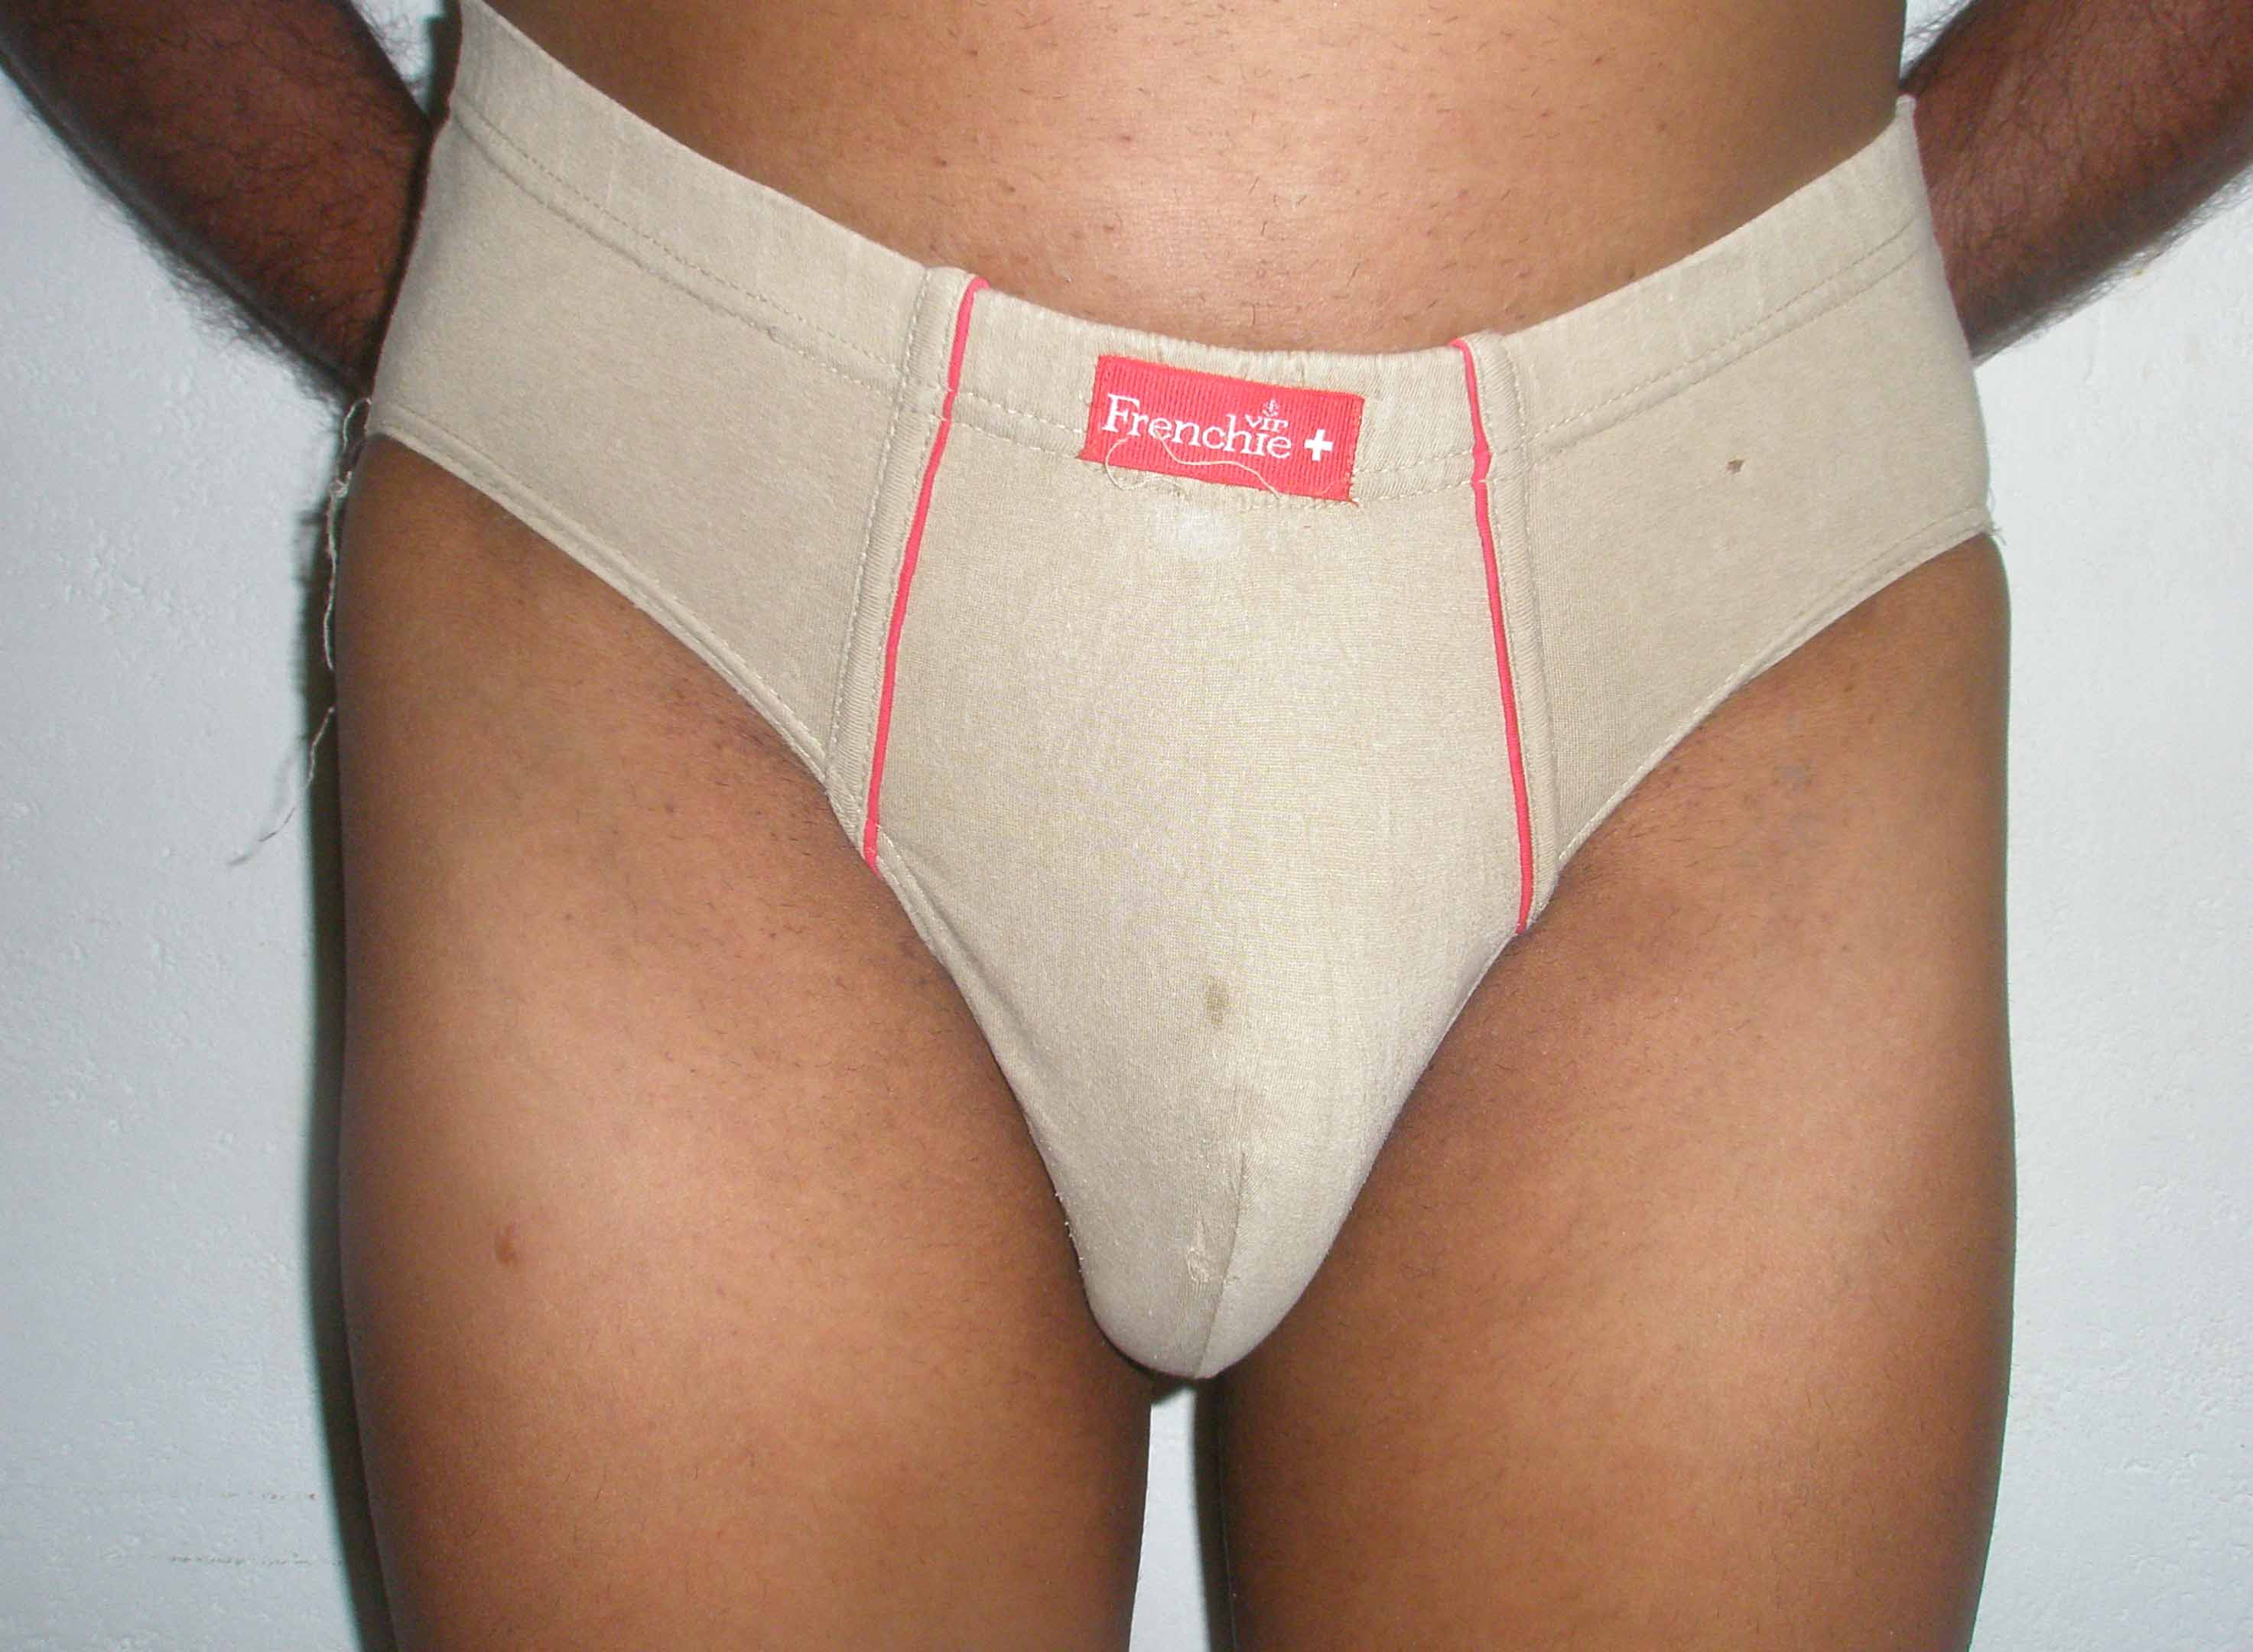 Implanted penis fitted with AMS Spectra-Penis kept in flaccid position - Front view.JPG